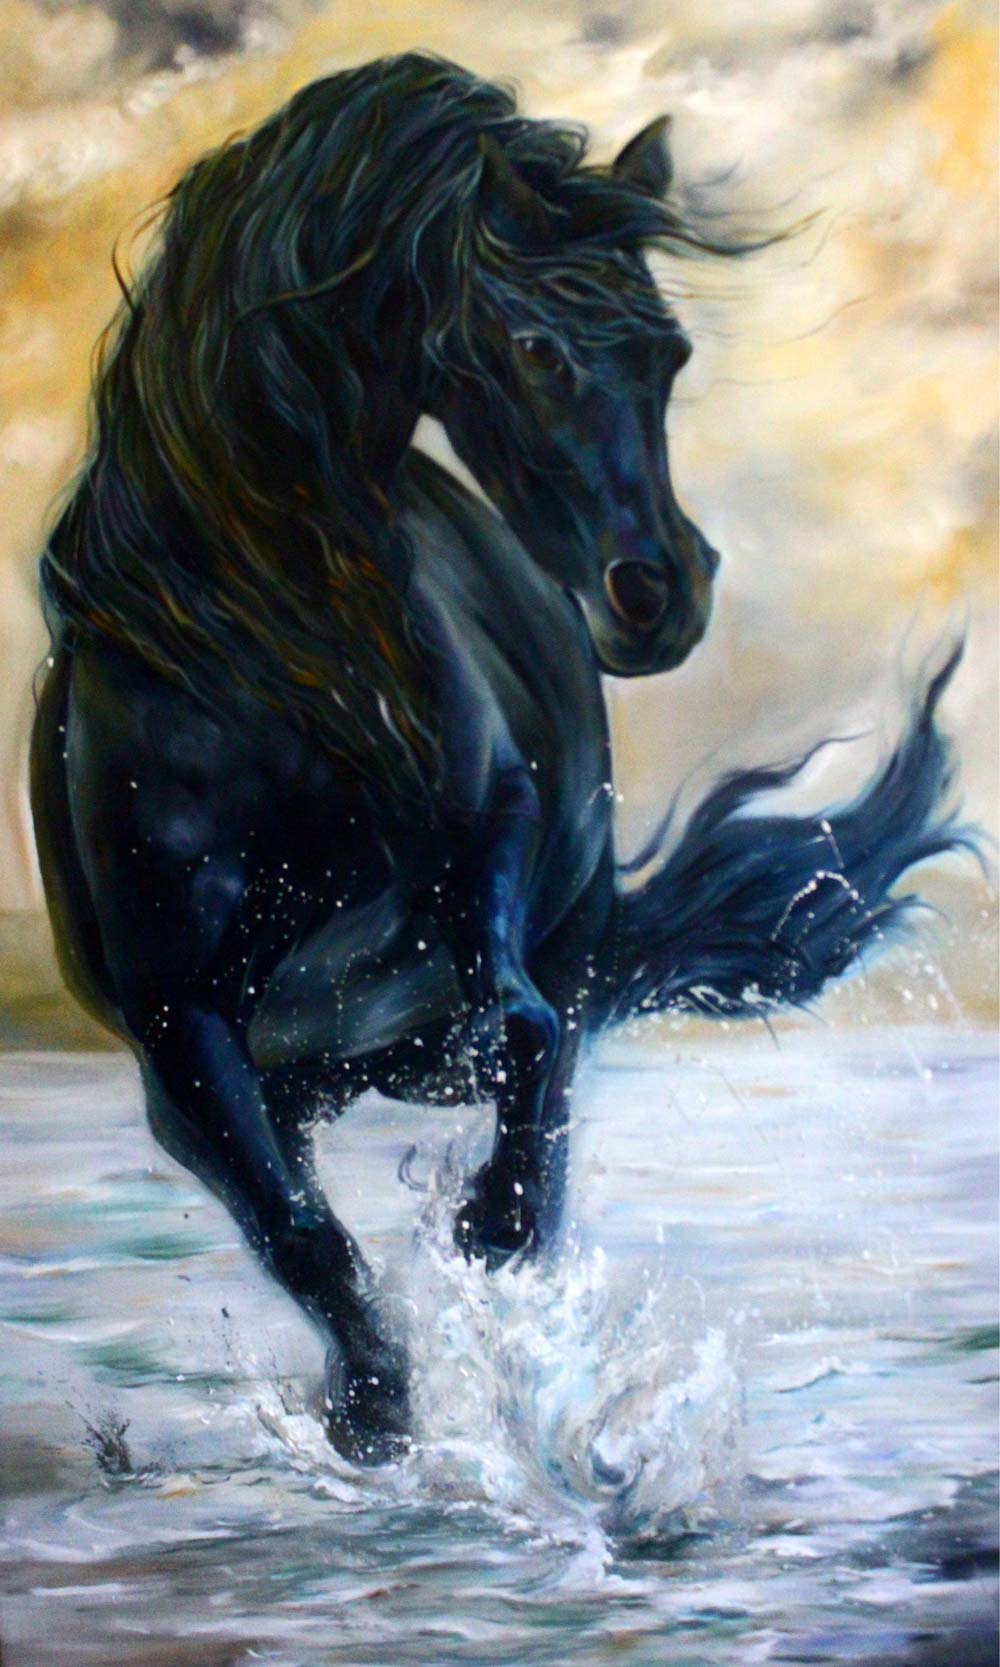 Realism Painting with Oil on Canvas "Horse Playing in the Water" art by Dhanashri Kale